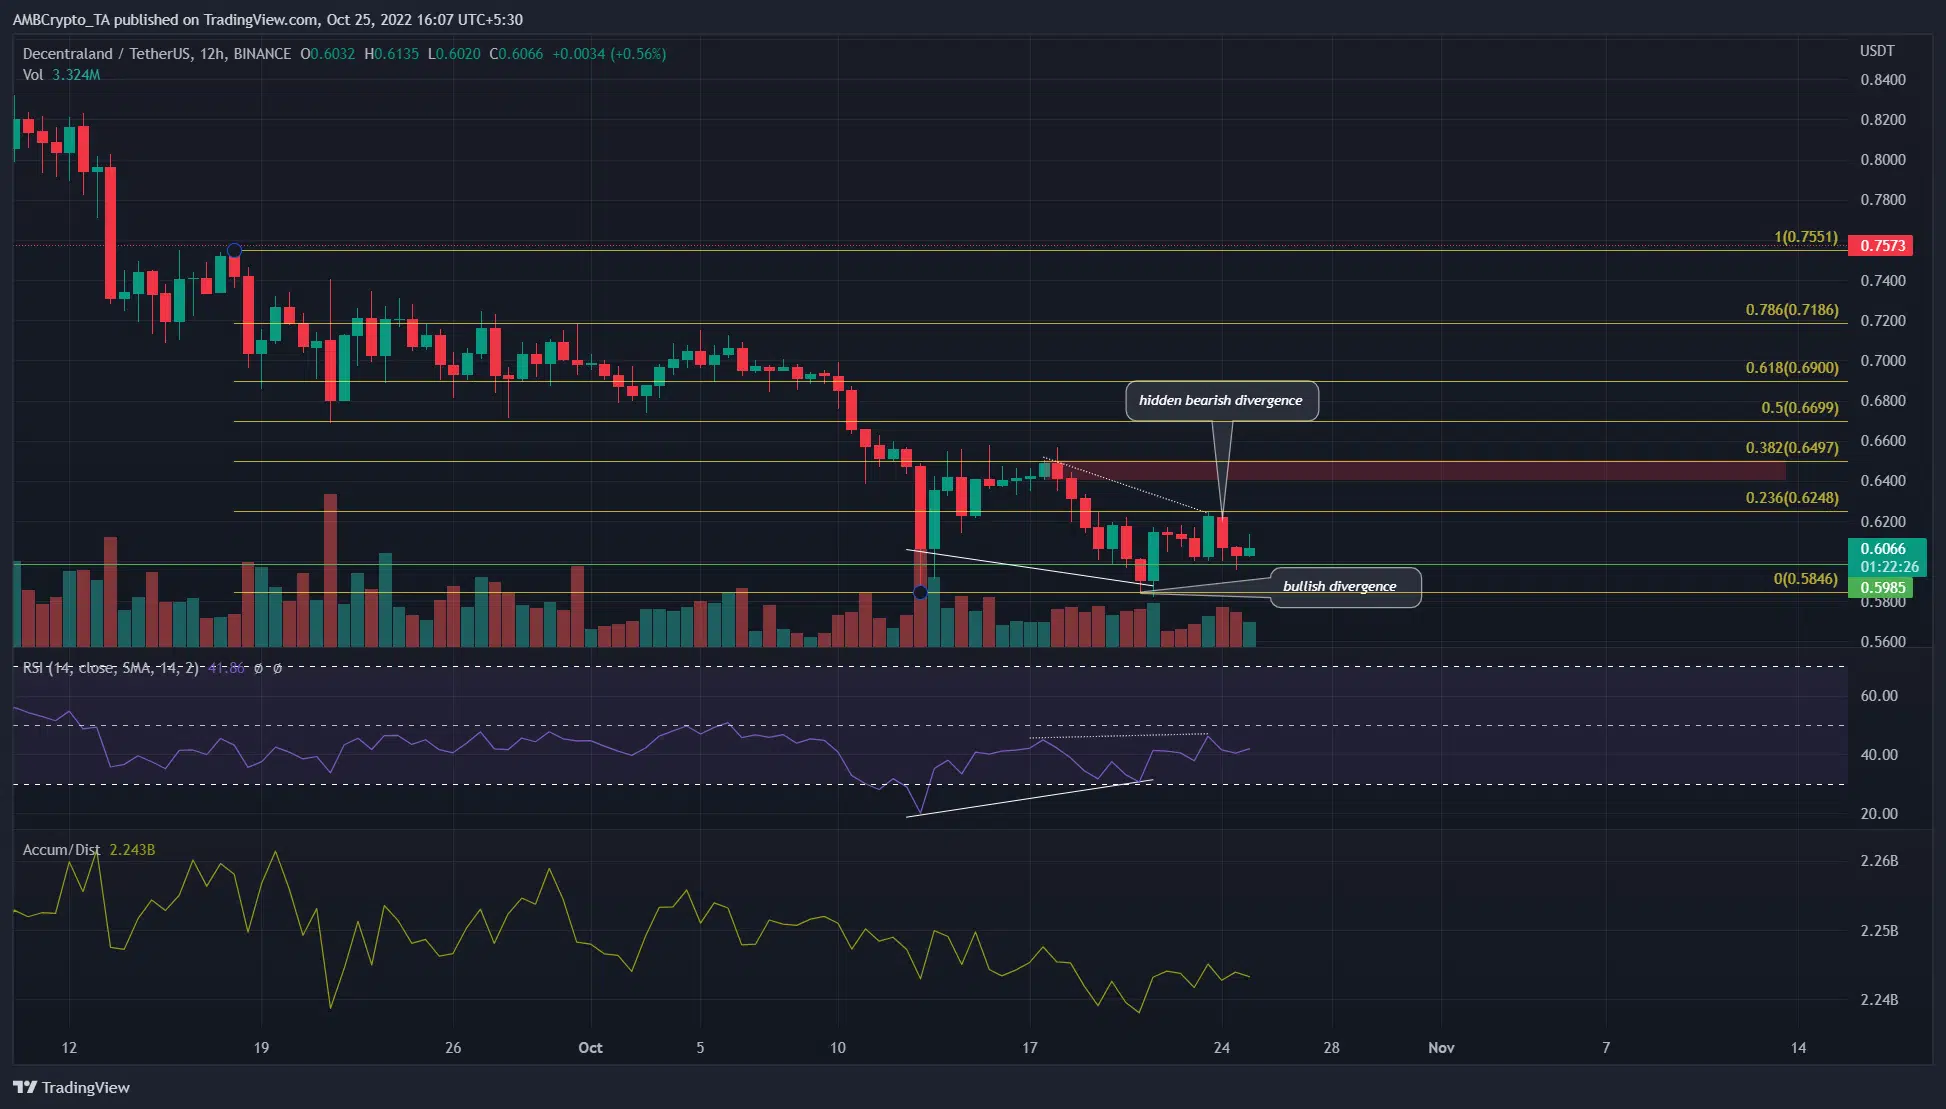 Here is why Decentraland [MANA] will continue its downtrend on the price charts